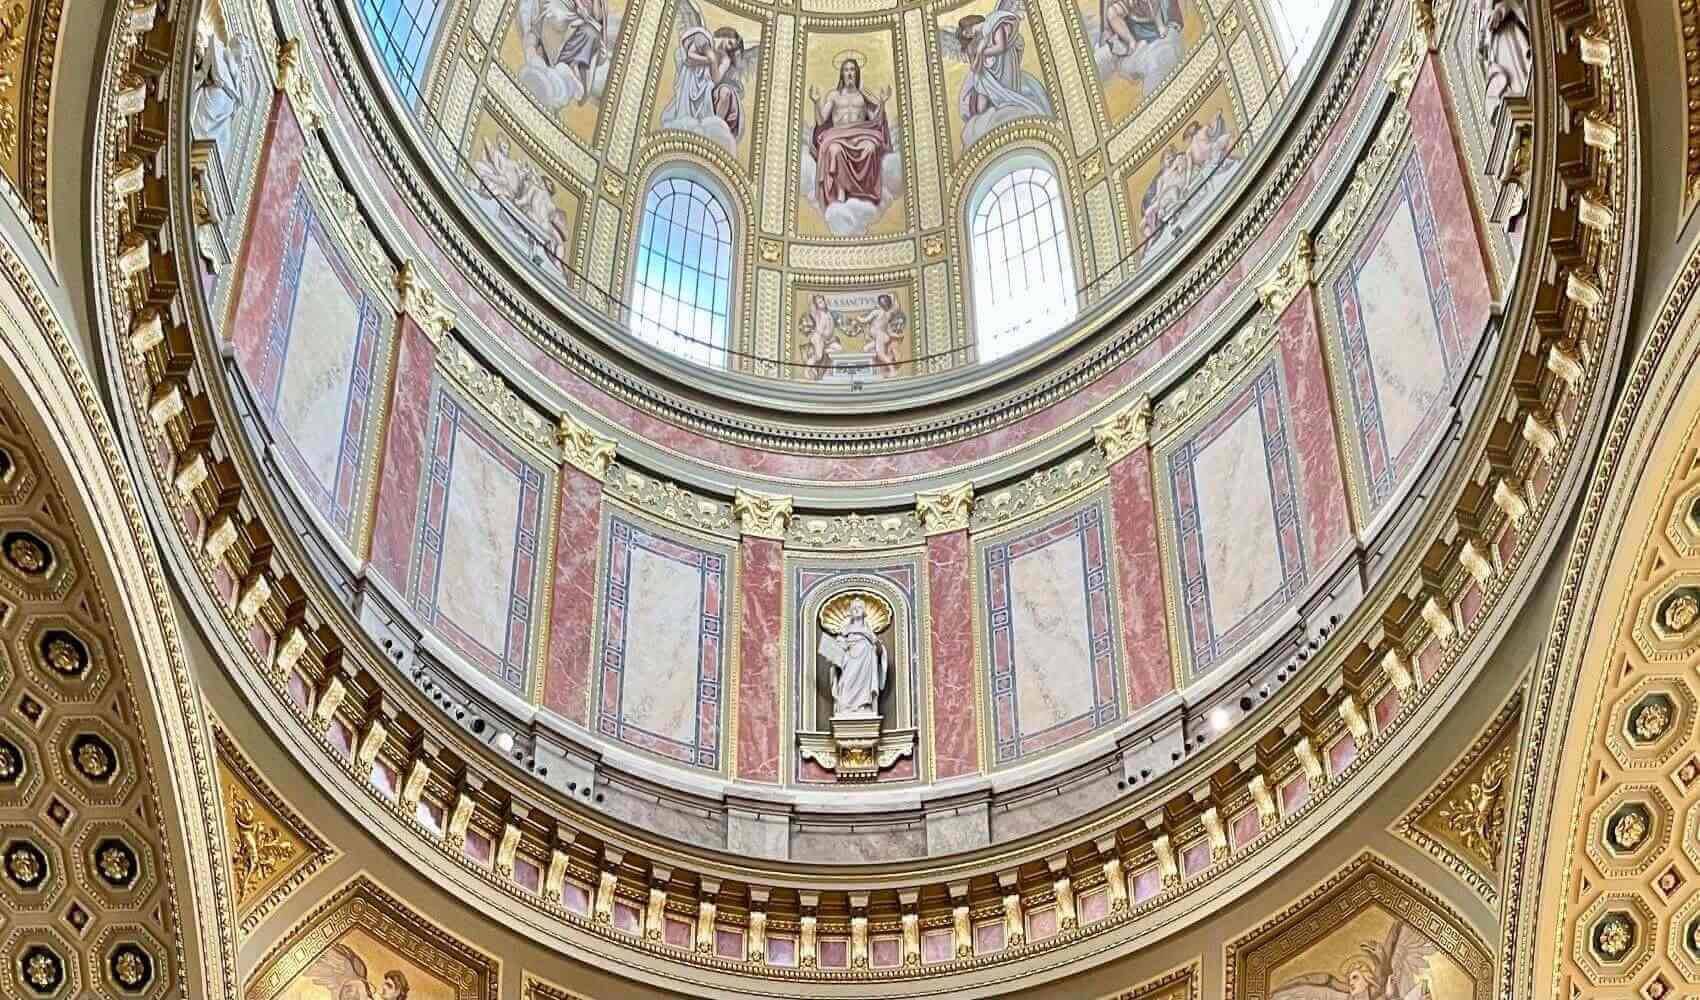 saint stephen's basilica dome (view from the inside)